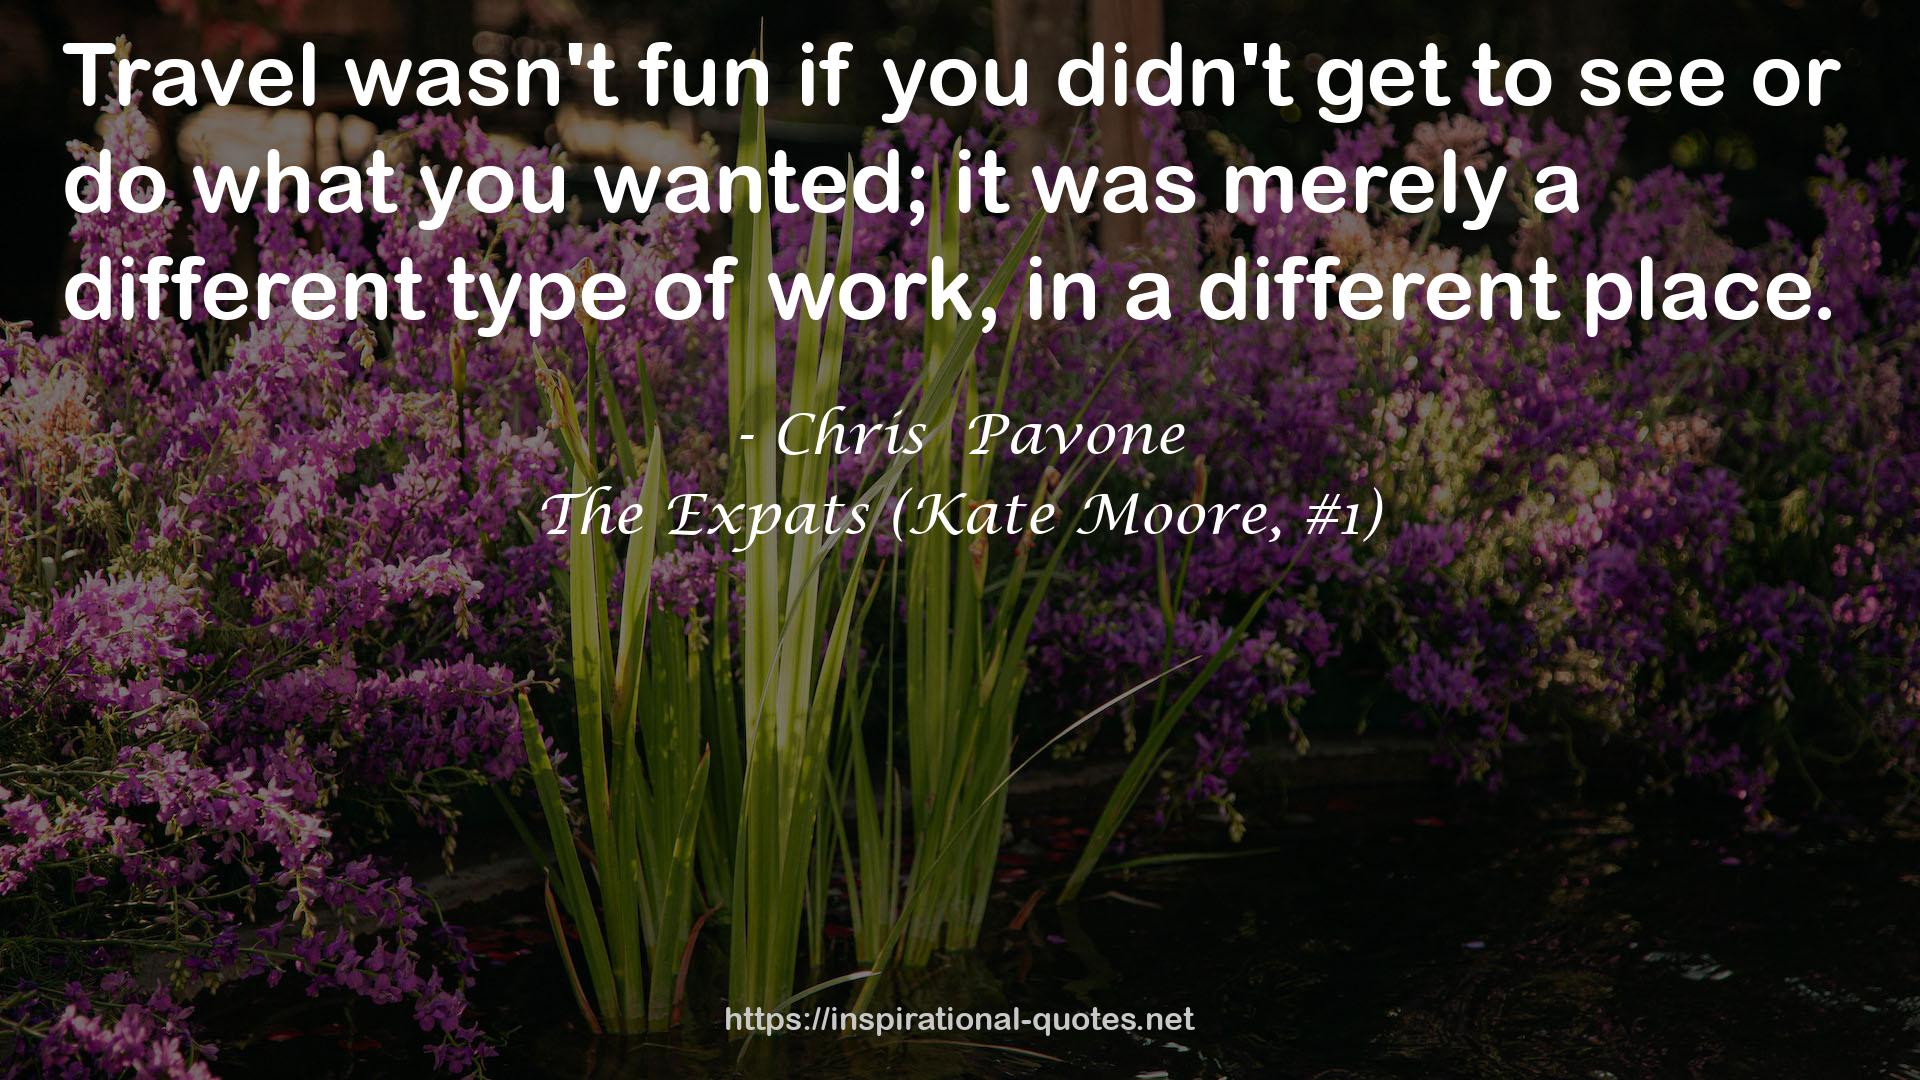 The Expats (Kate Moore, #1) QUOTES